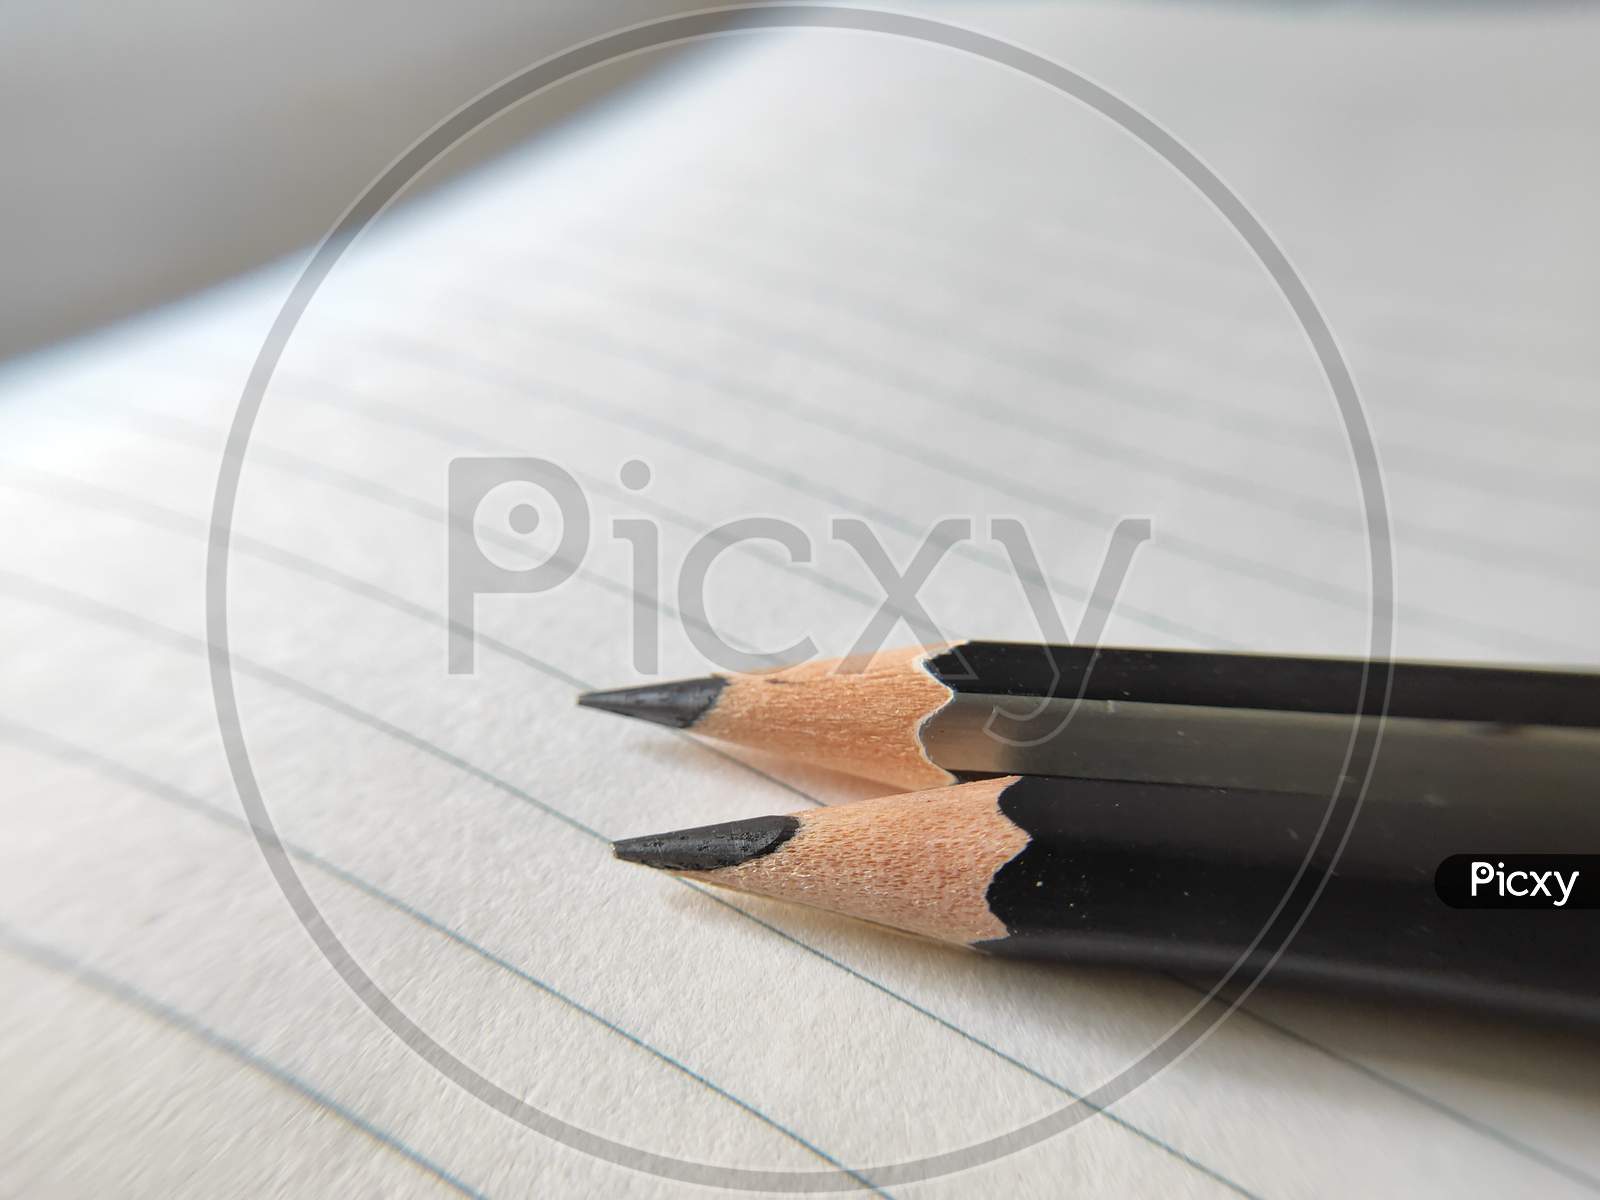 Pencil on white background. Pointed pencil on plain background. Pencil and sharpener on white paper. Pencil and straight line on paper.